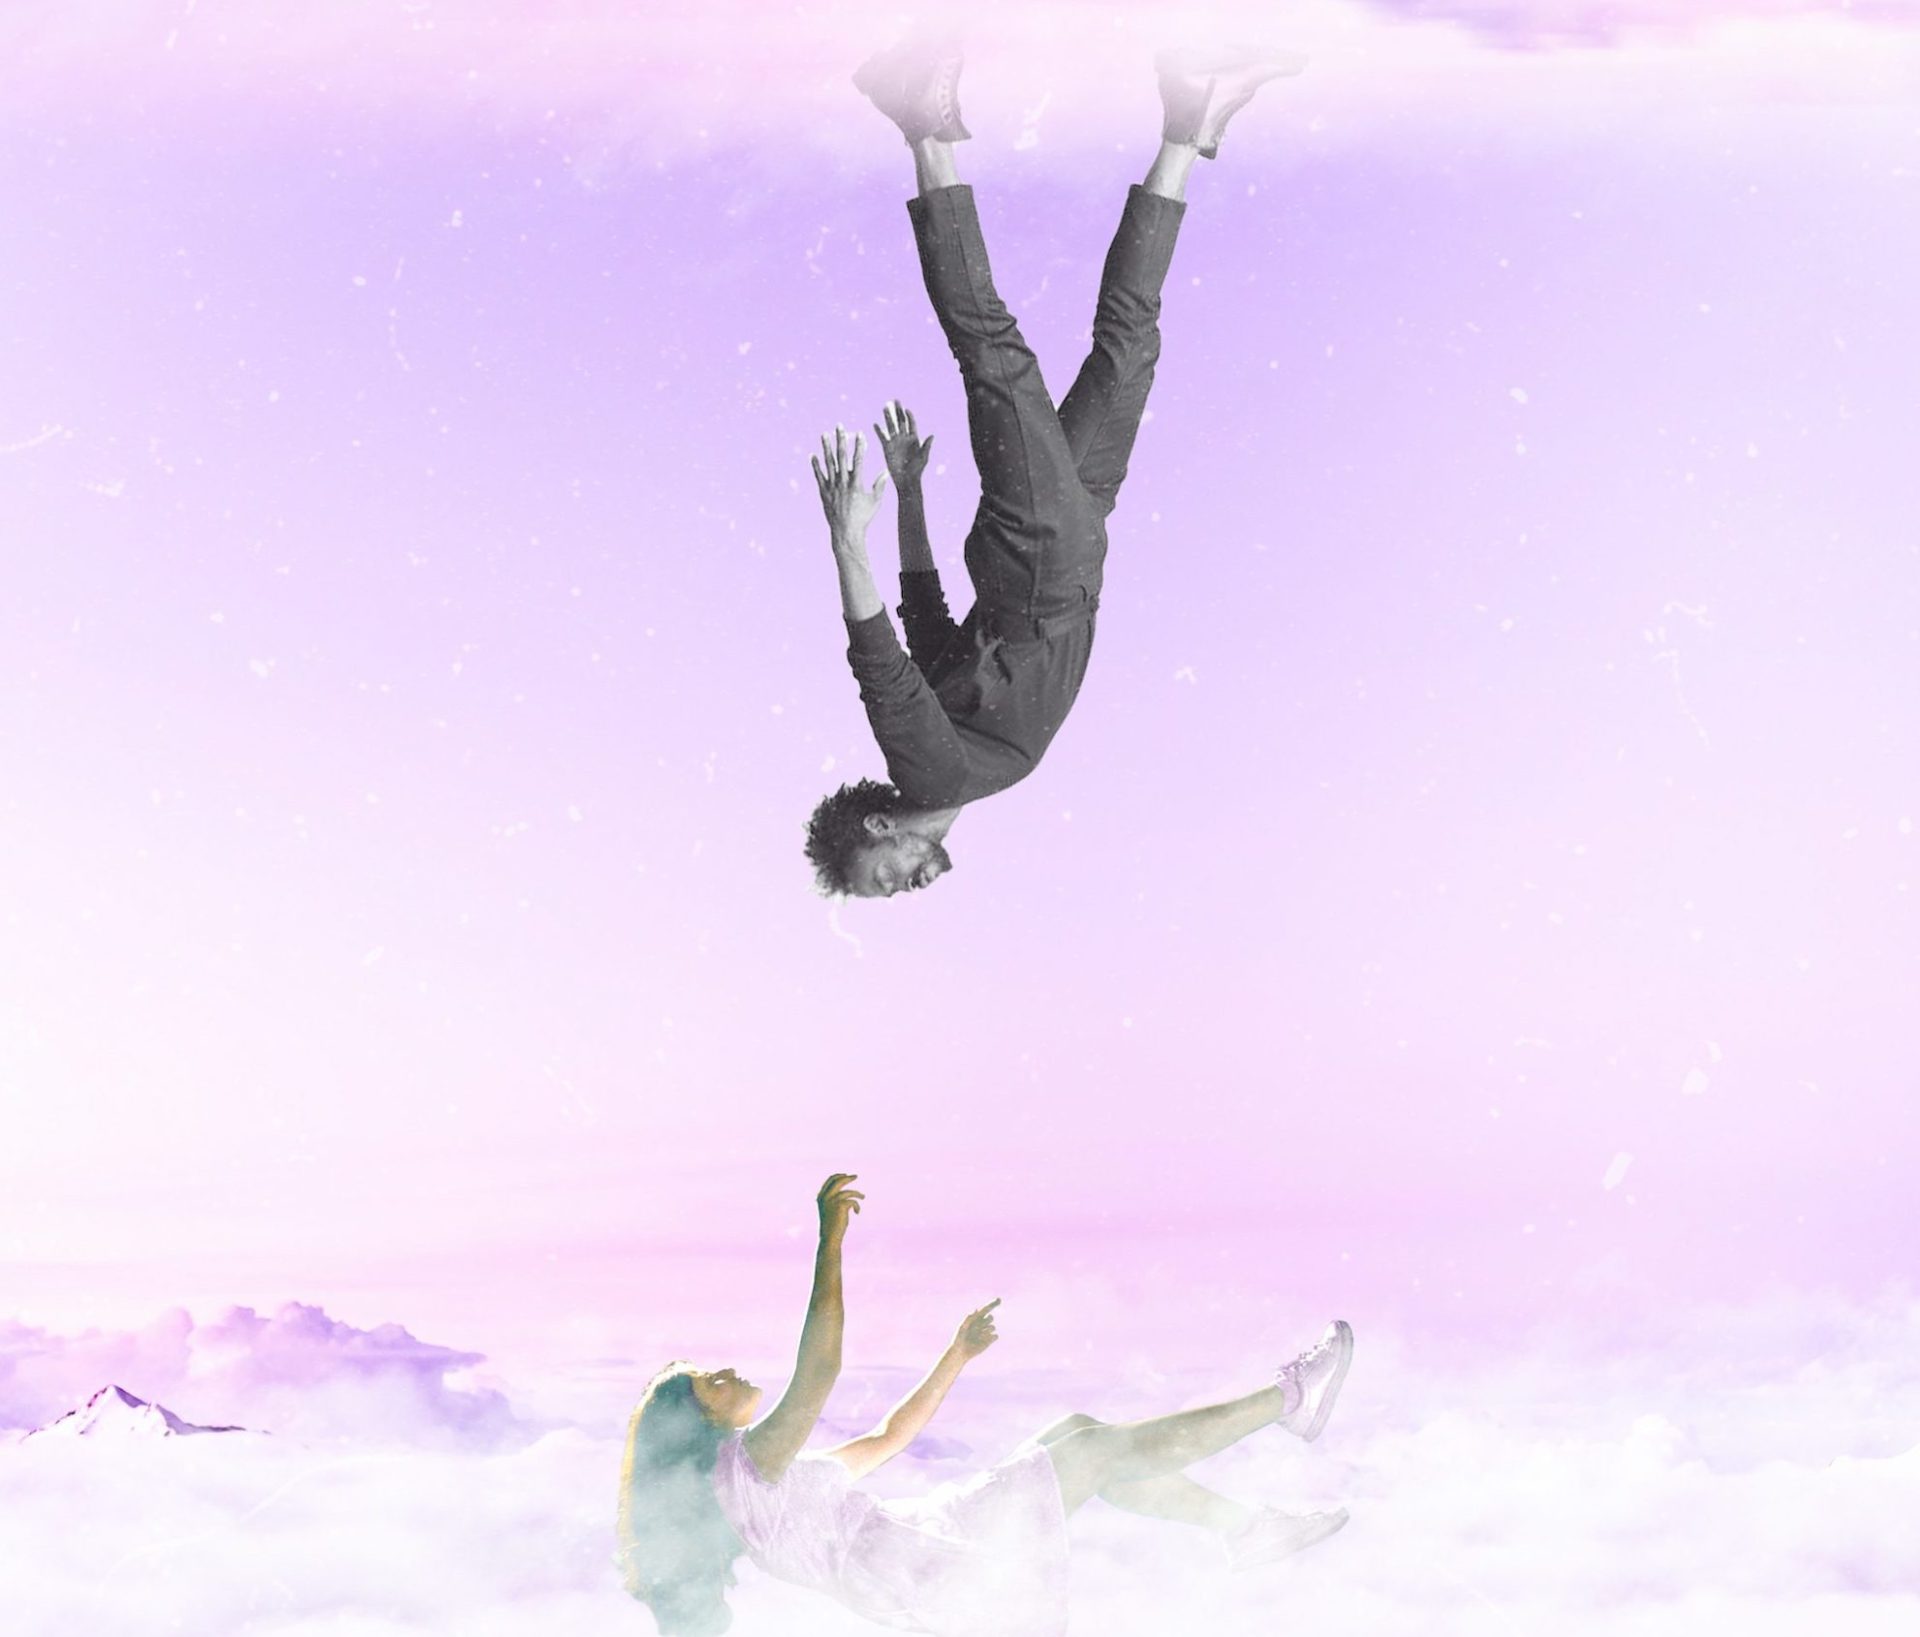 a light purple background simulating clouds. A Black man appears to be walking upside down with his eyes closed while a woman floats beneath him with her arms stretched upwards.